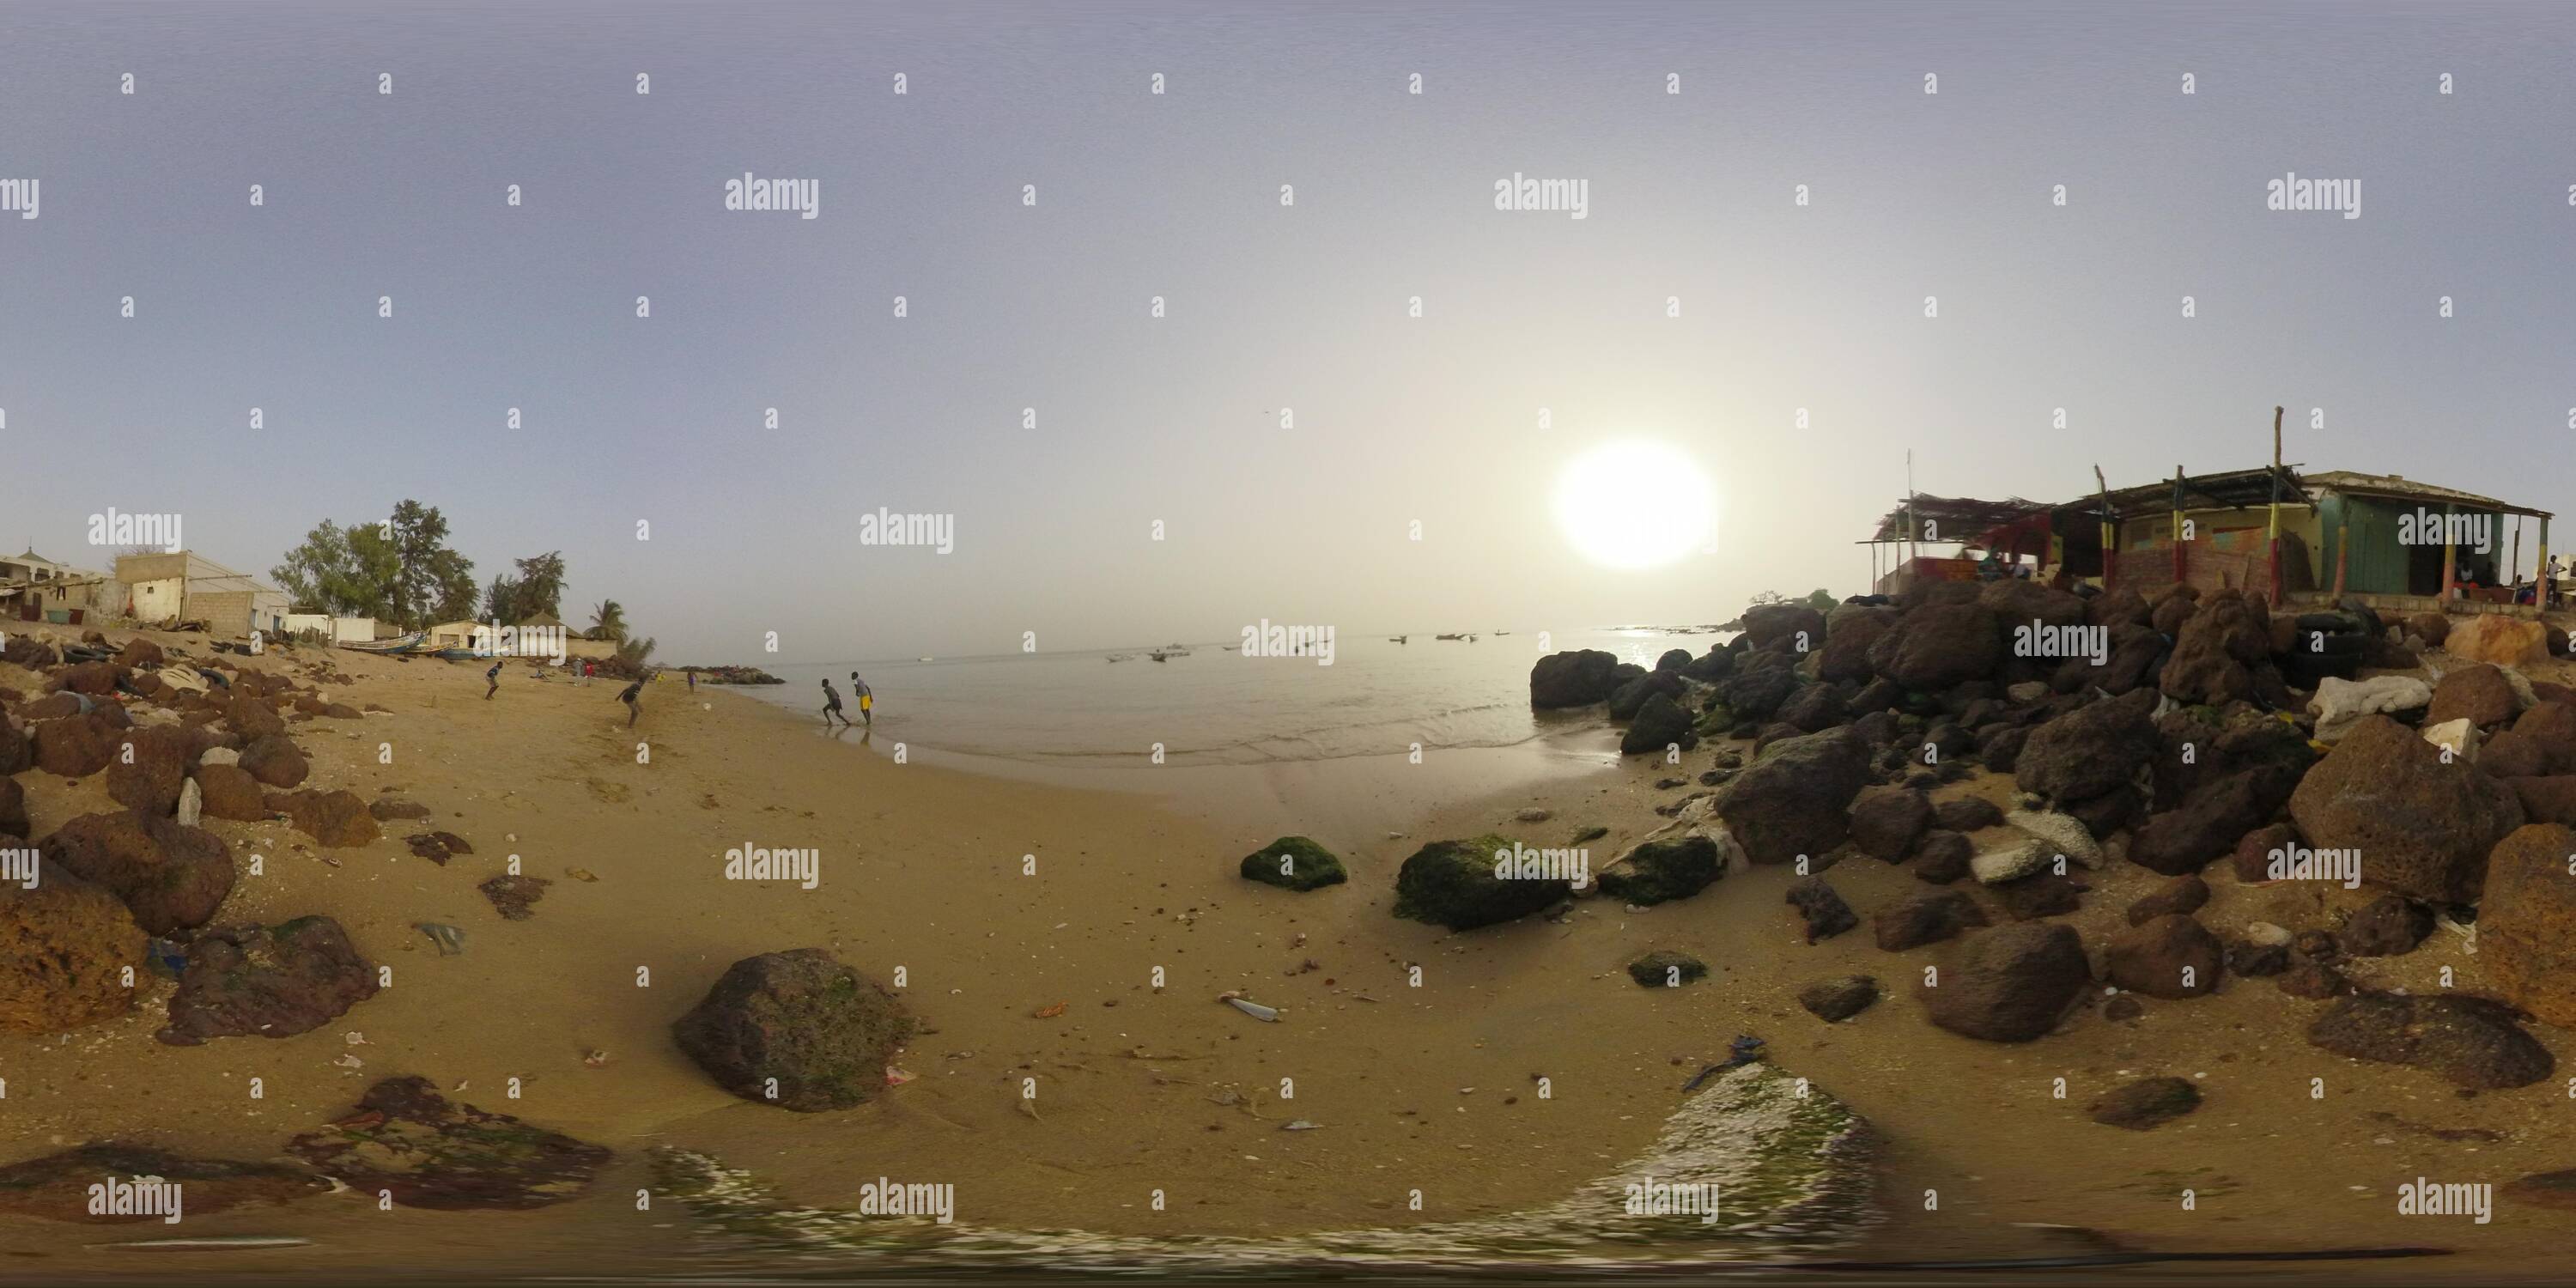 360 degree panoramic view of M´Bour, Senegal, 12th March 2019: 360 image of boys playing football by the sea